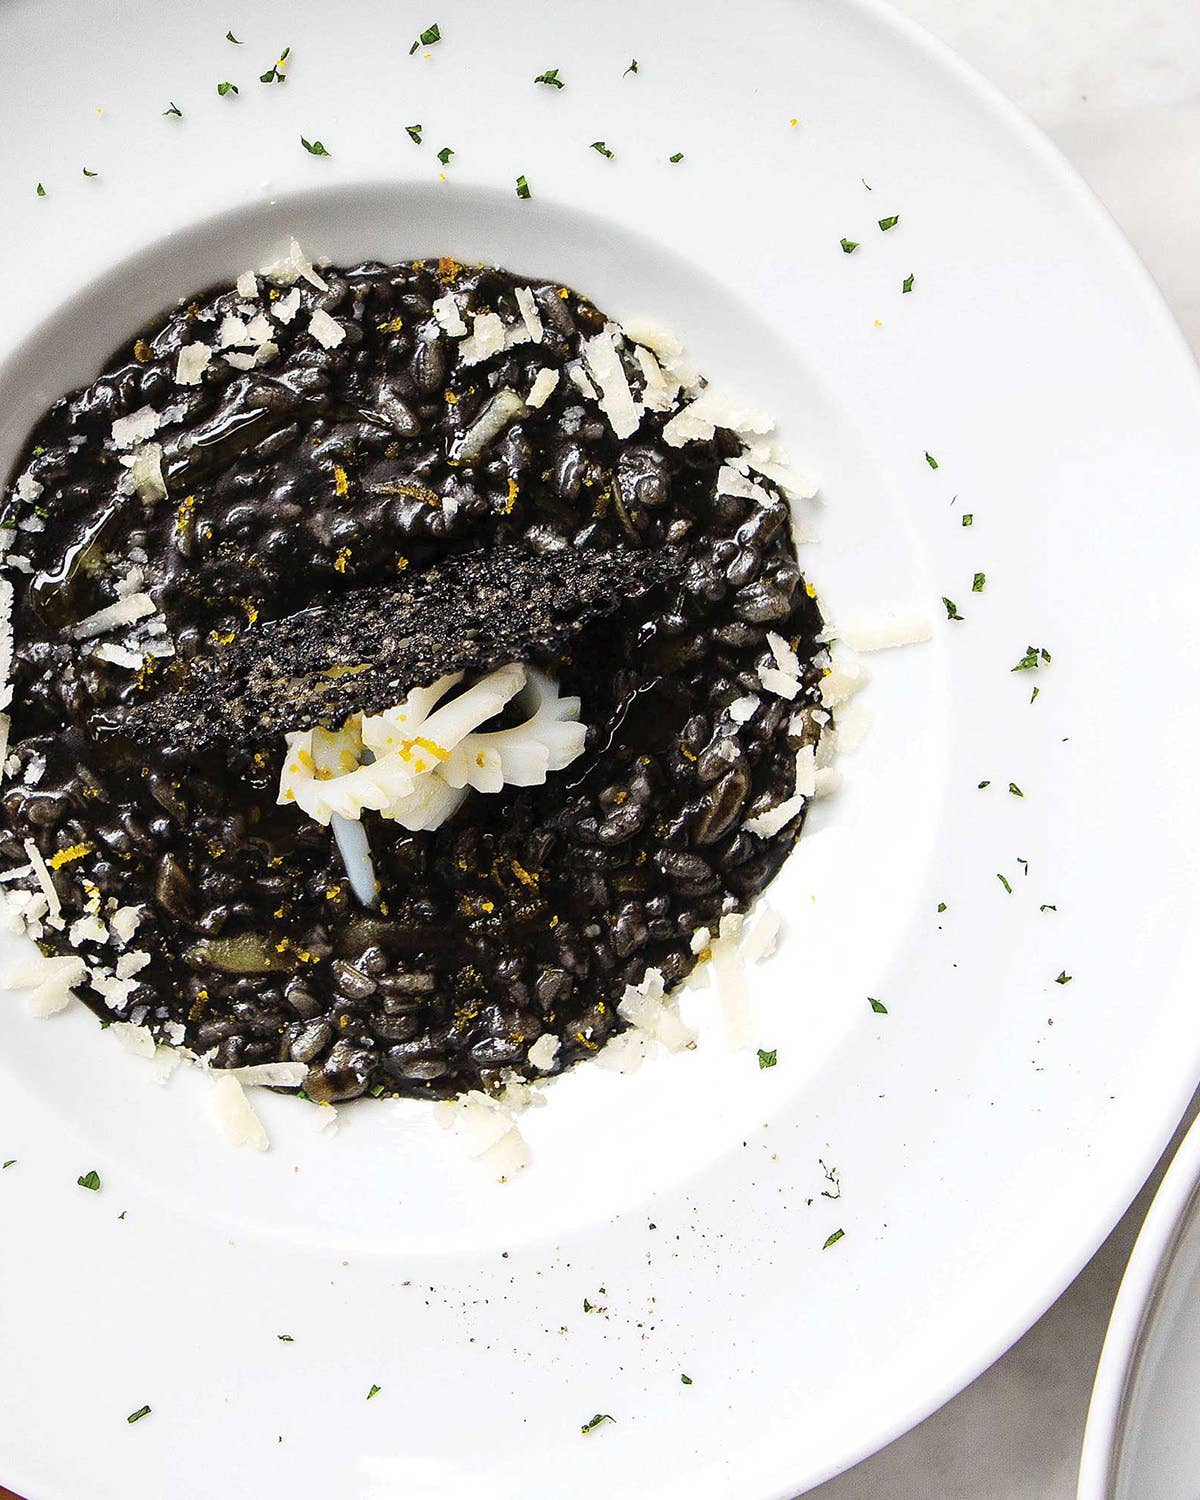 Go Cook With Cuttlefish Ink, Our Favorite Form of Black Magic